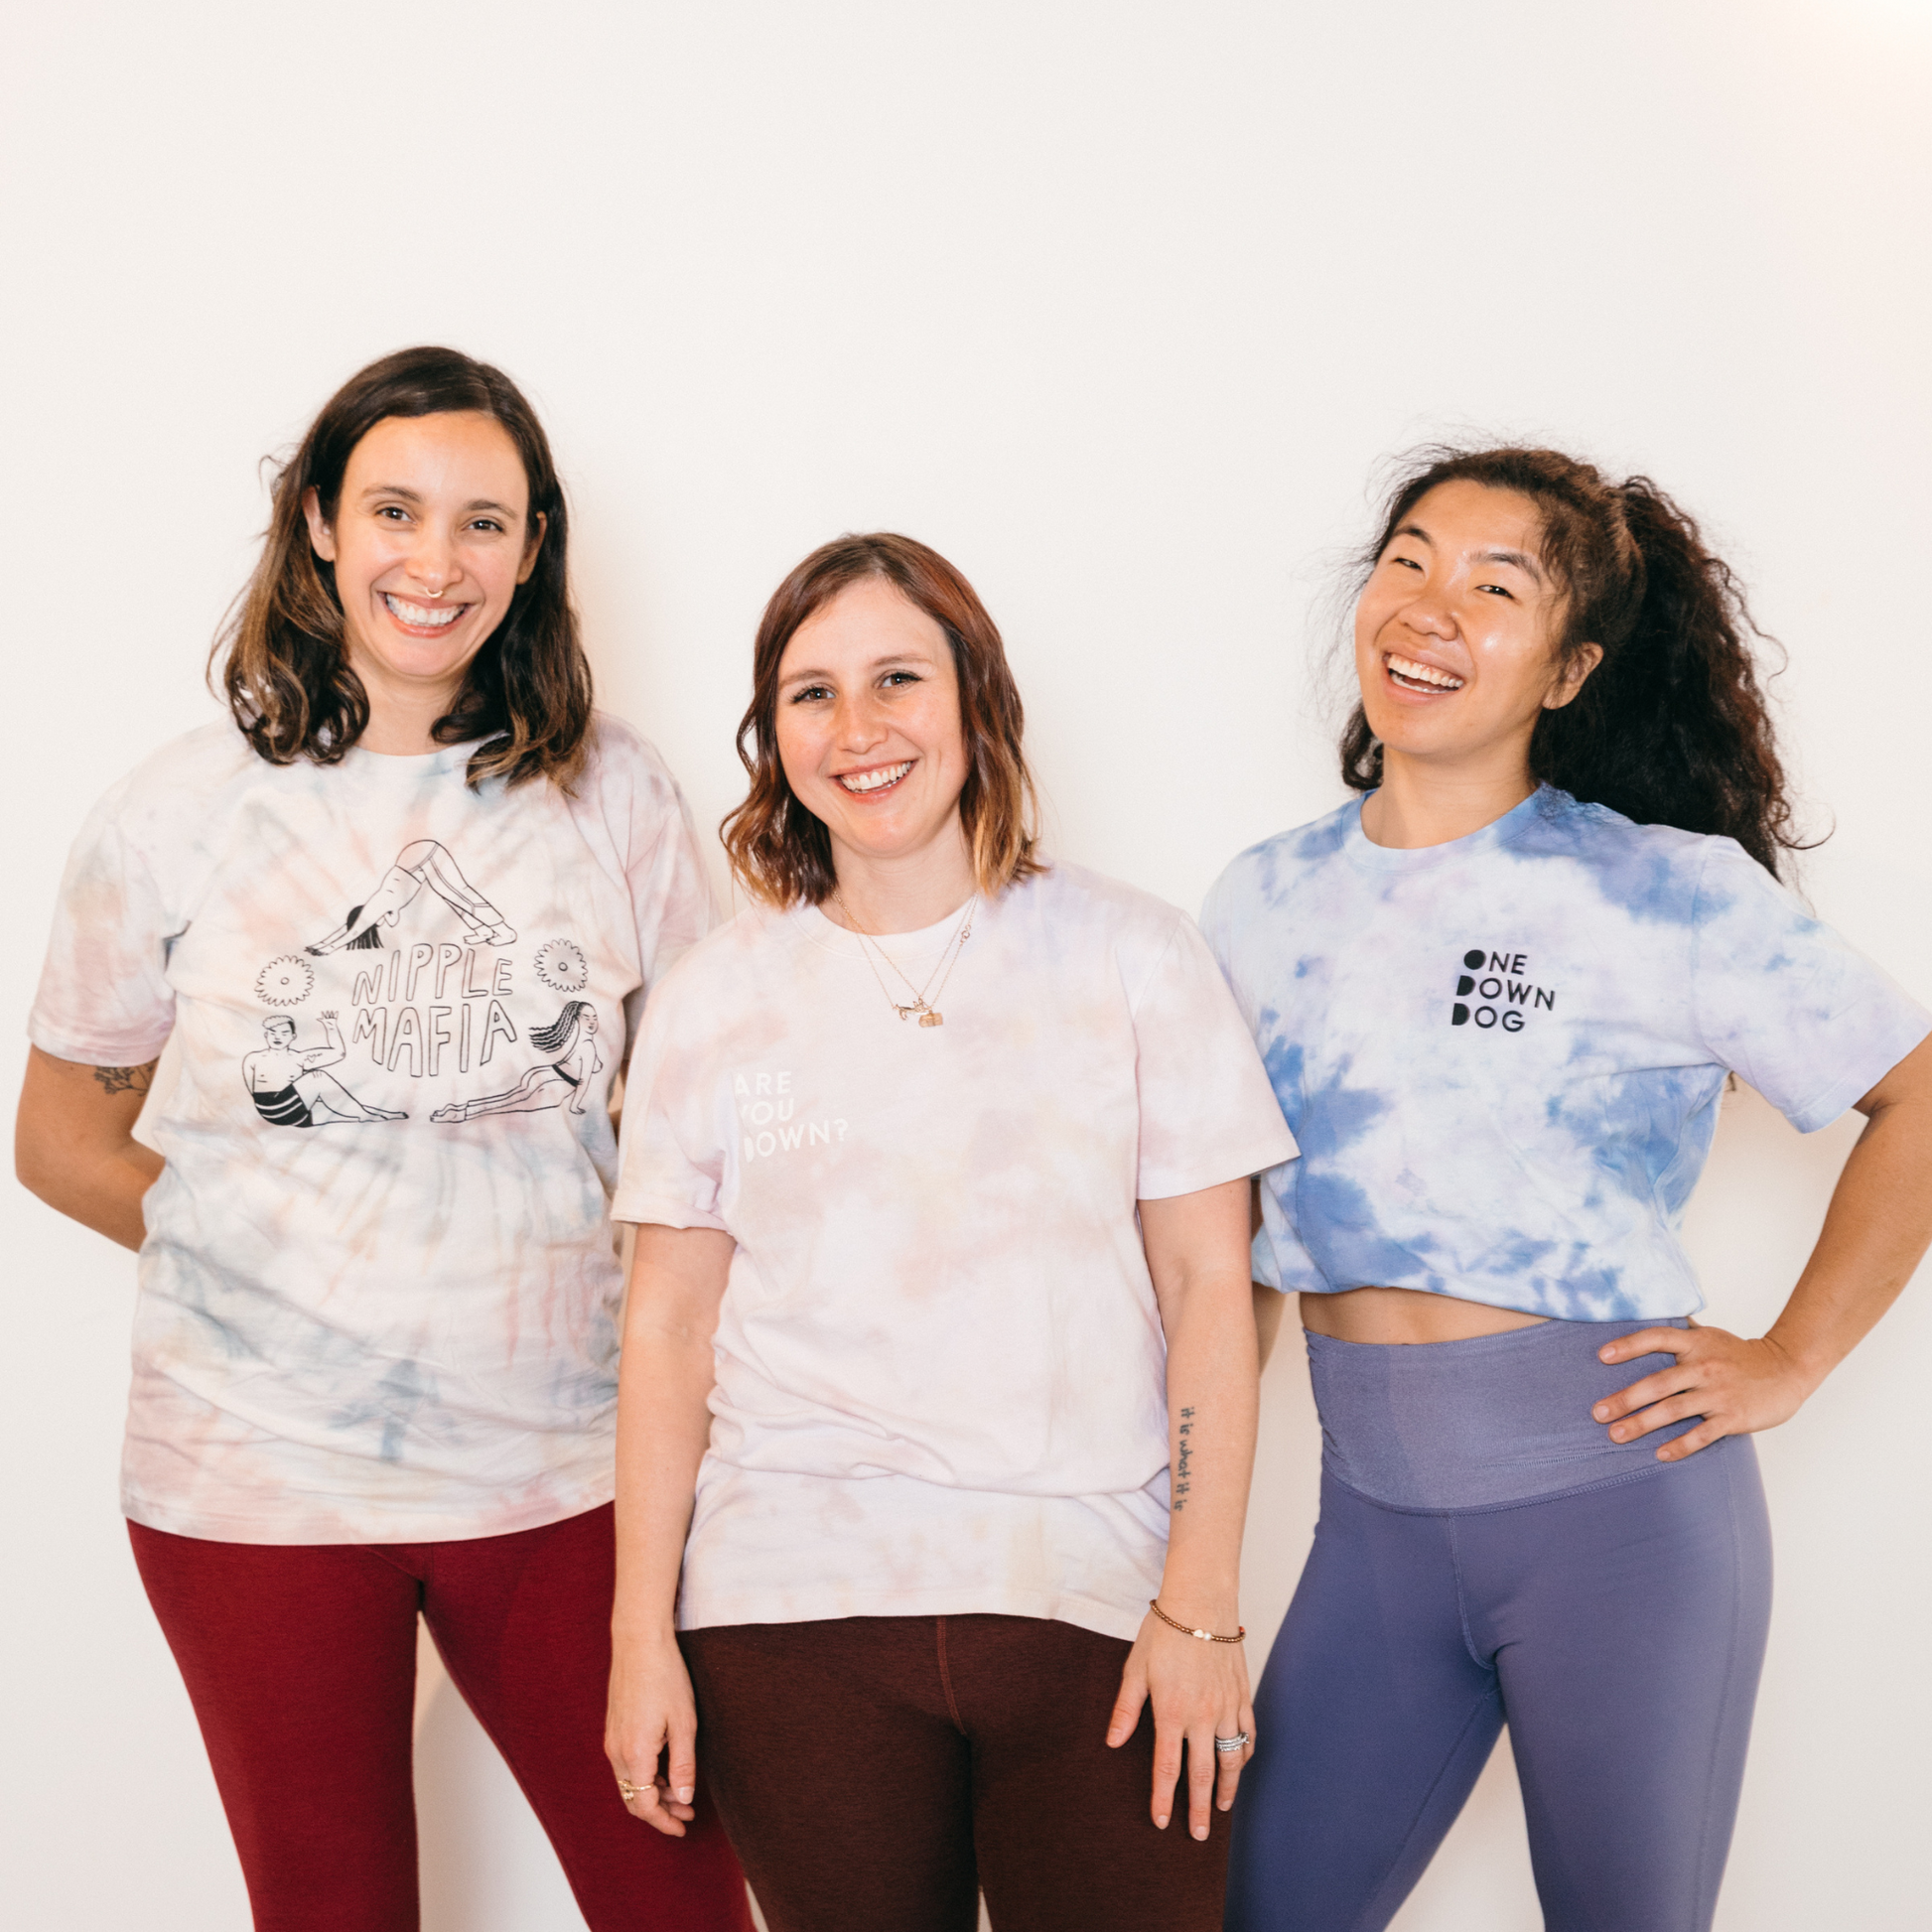 trio of tie-dye tees with different designs and phrases